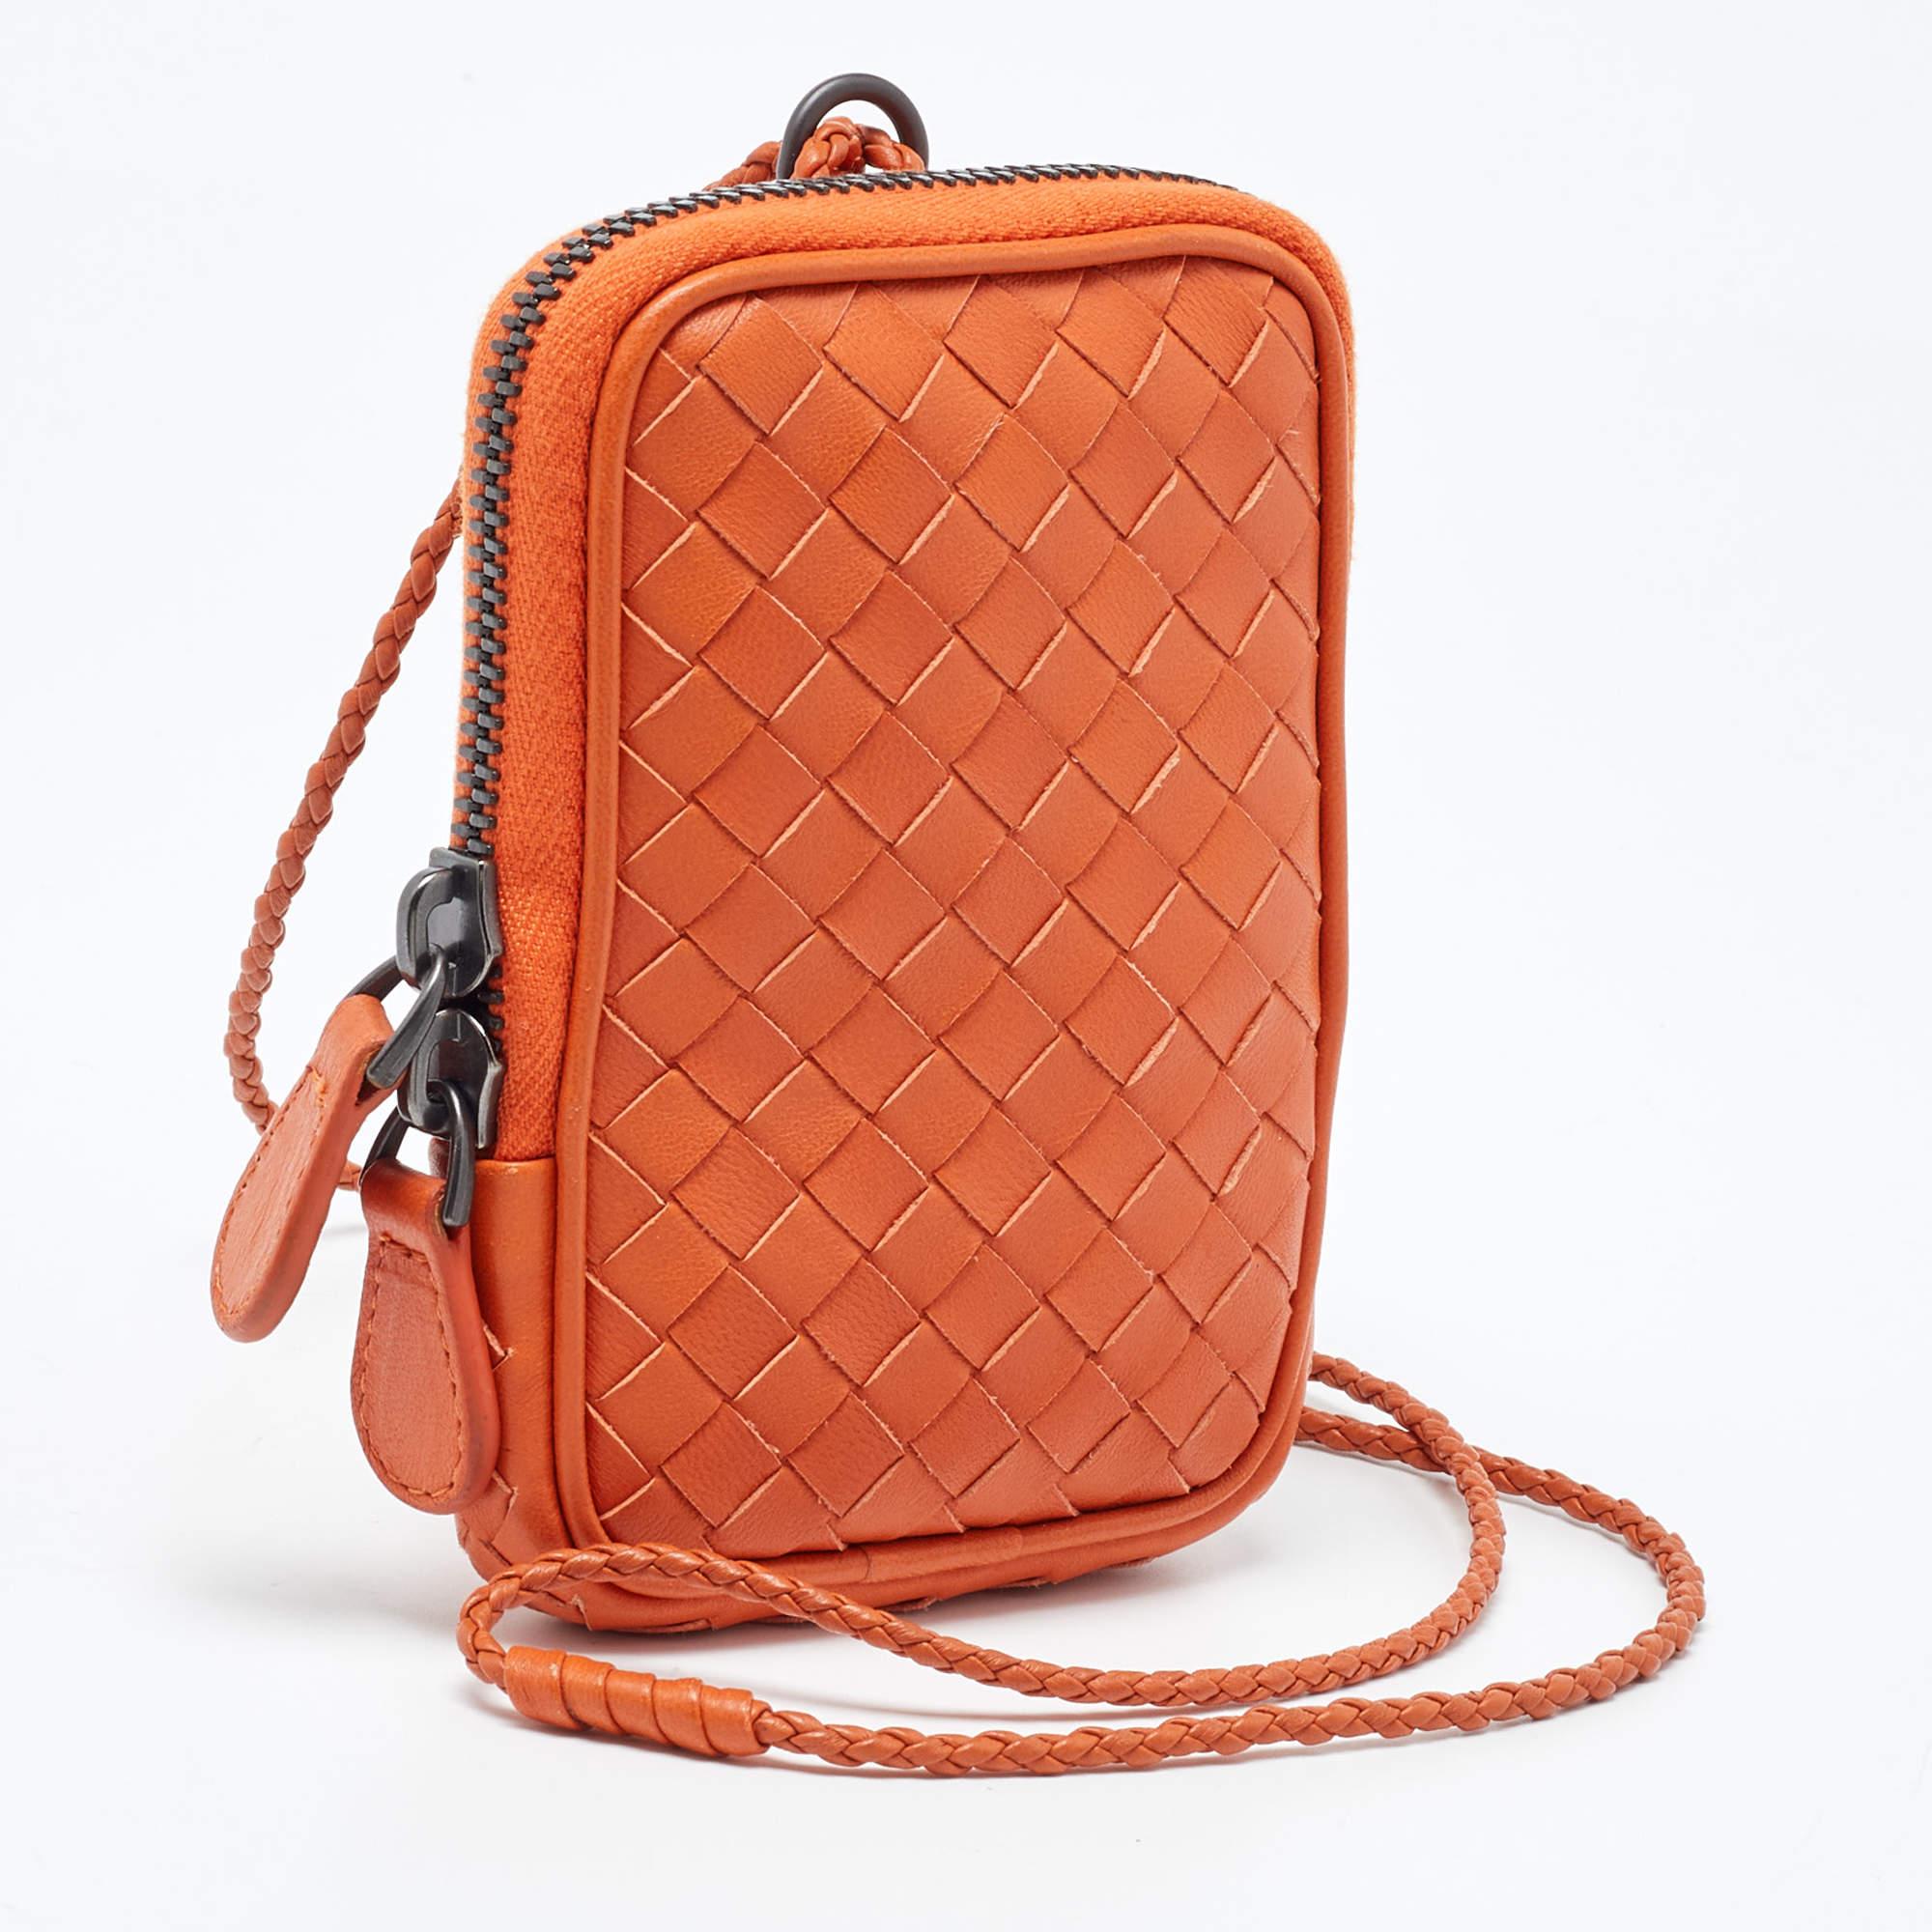 The Bottega Veneta pouch is a luxurious accessory crafted from high-quality leather. It features the brand's signature woven pattern, a secure zip closure, and a spacious interior for organizing essentials. This elegant pouch exudes sophistication